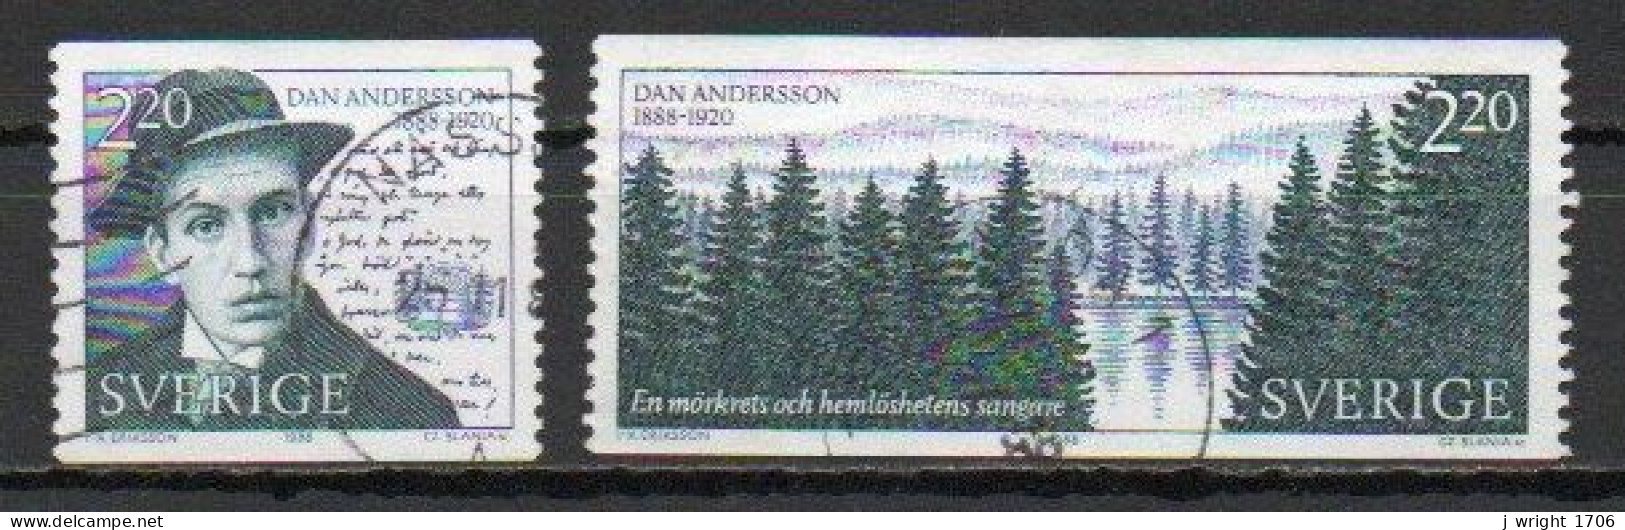 Sweden, 1988, Dan Andersson, Set, USED - Used Stamps